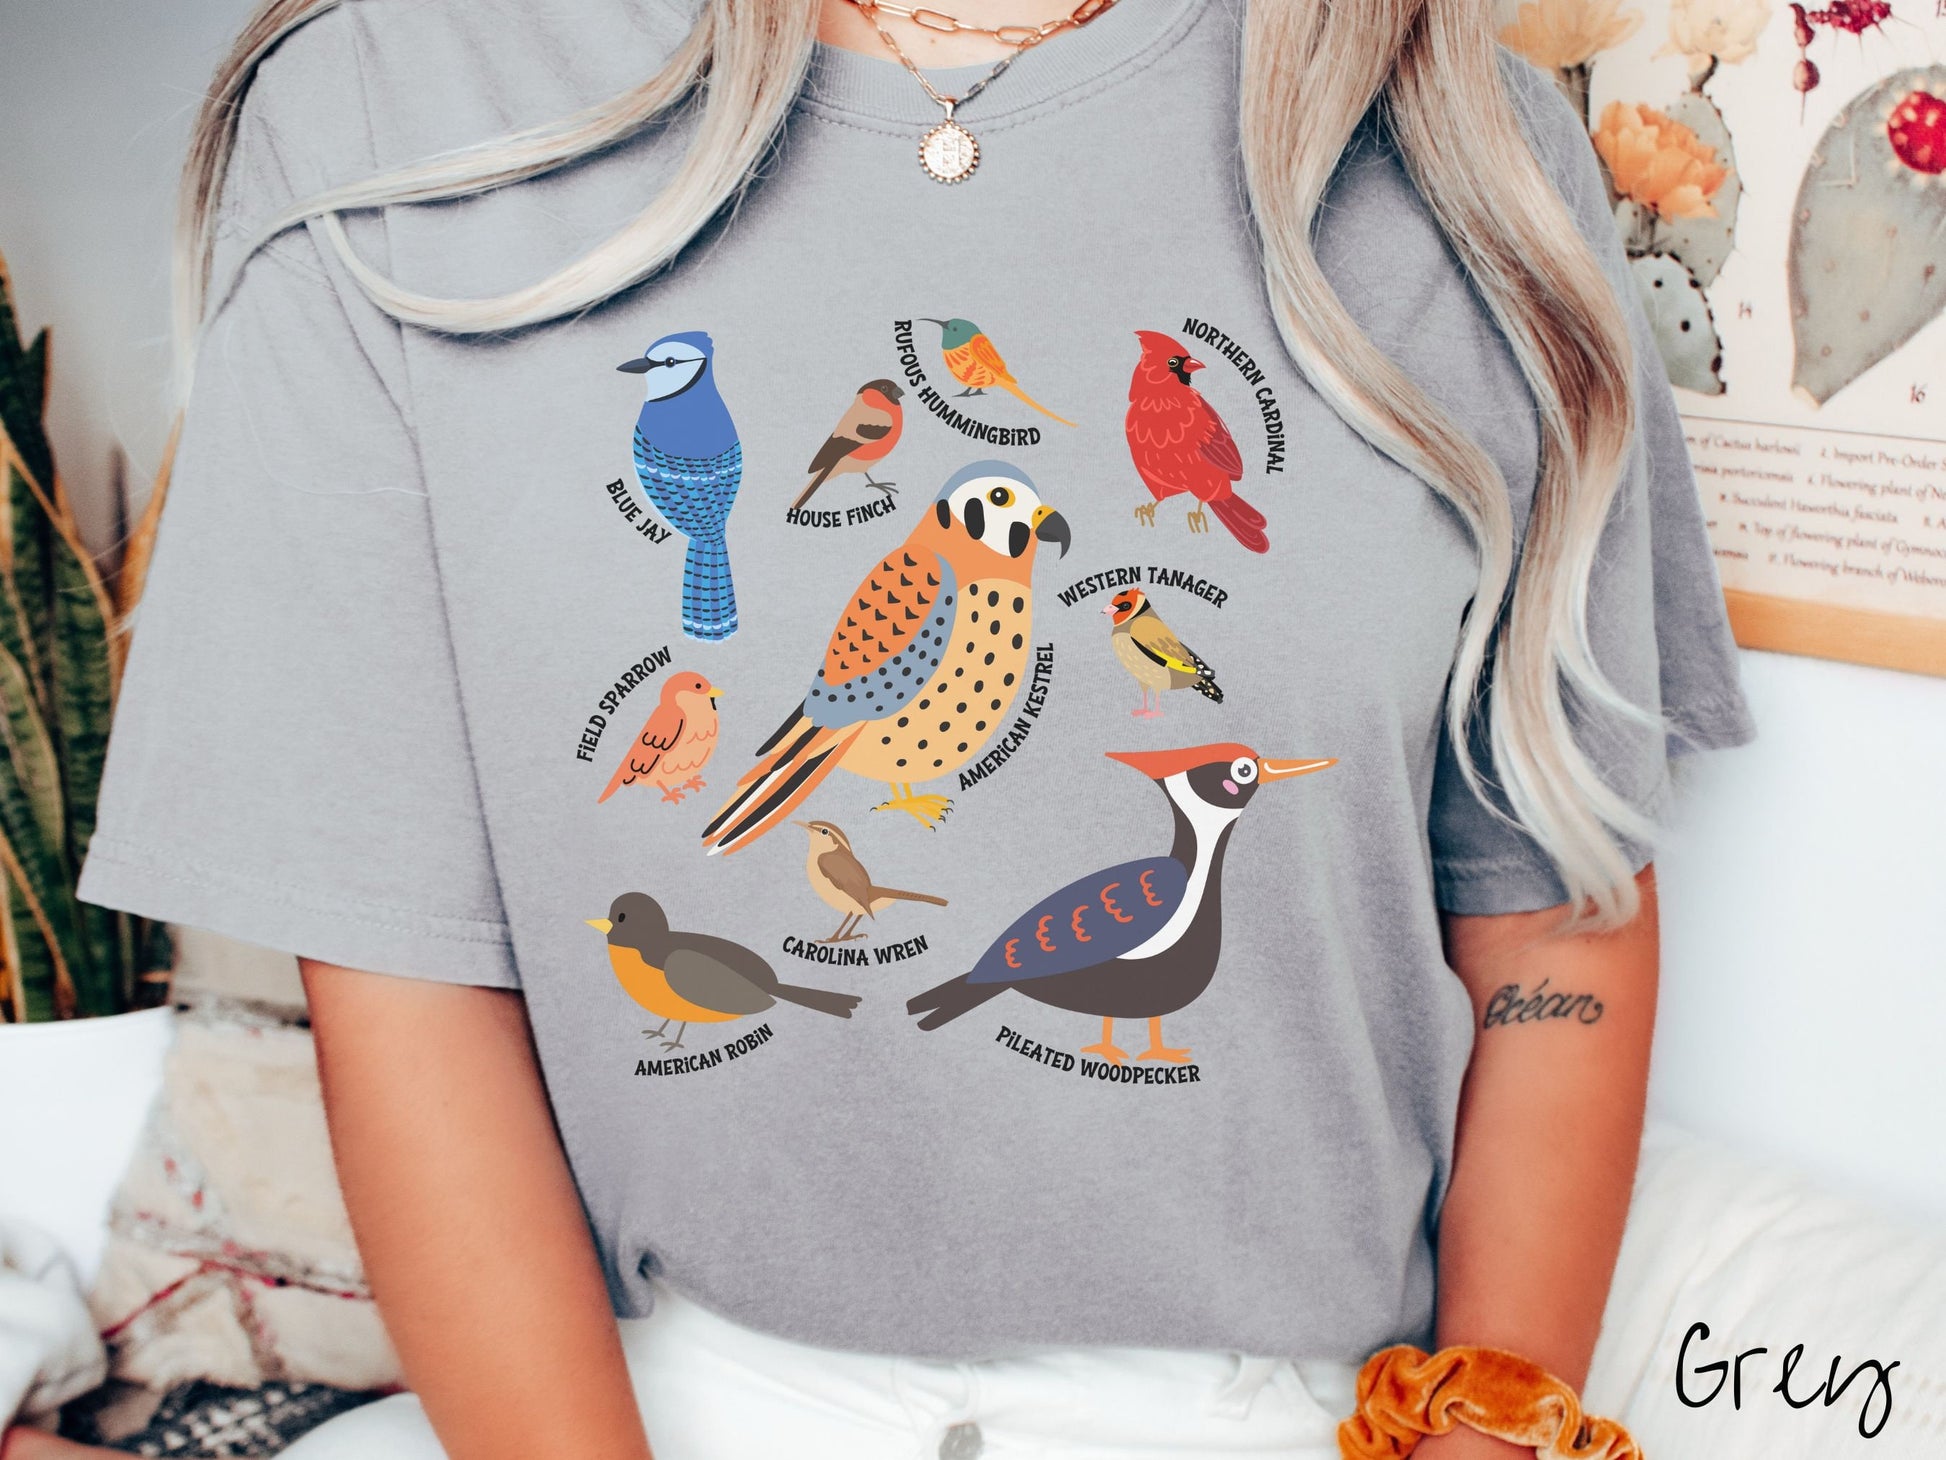 A woman wearing a cute, vintage grey colored Comfort Colors shirt with pictures of nine different bird species and their names listed across the front. Some examples are the Blue Jay, House Finch, Western Tanager, and Carolina Wren.